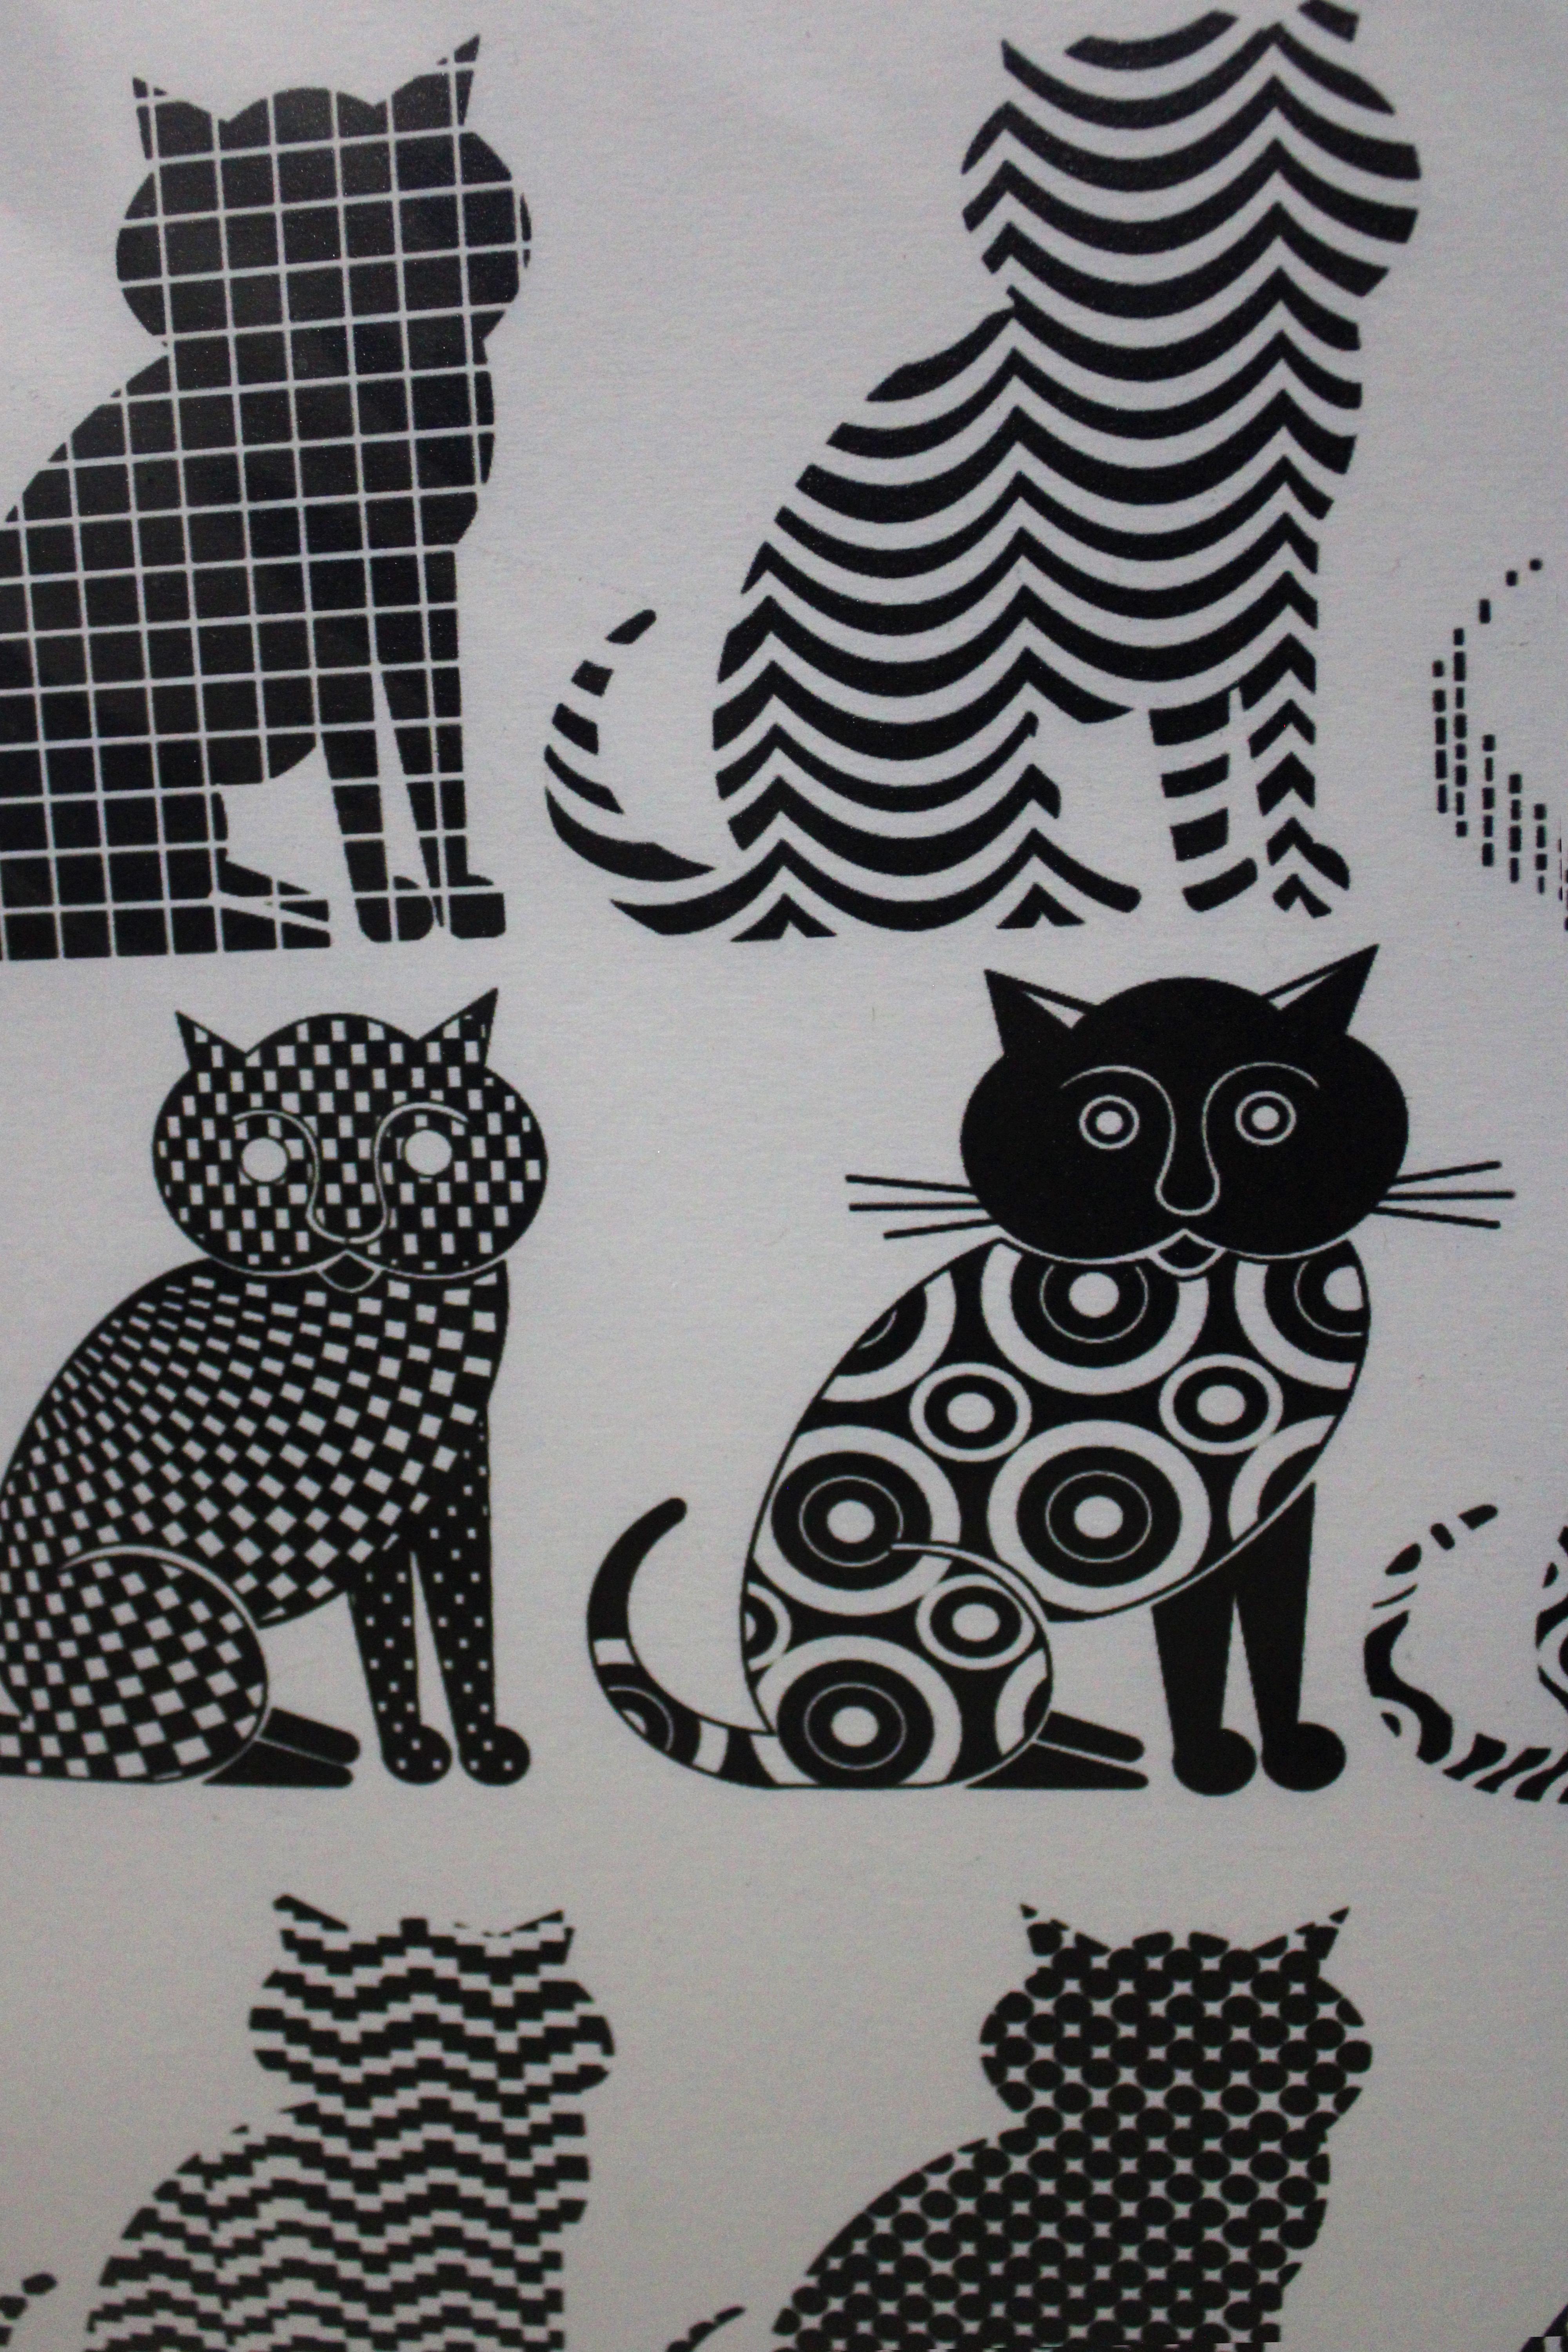 Cats of all nations unite! - Contemporary Print by Pedro Friedeberg